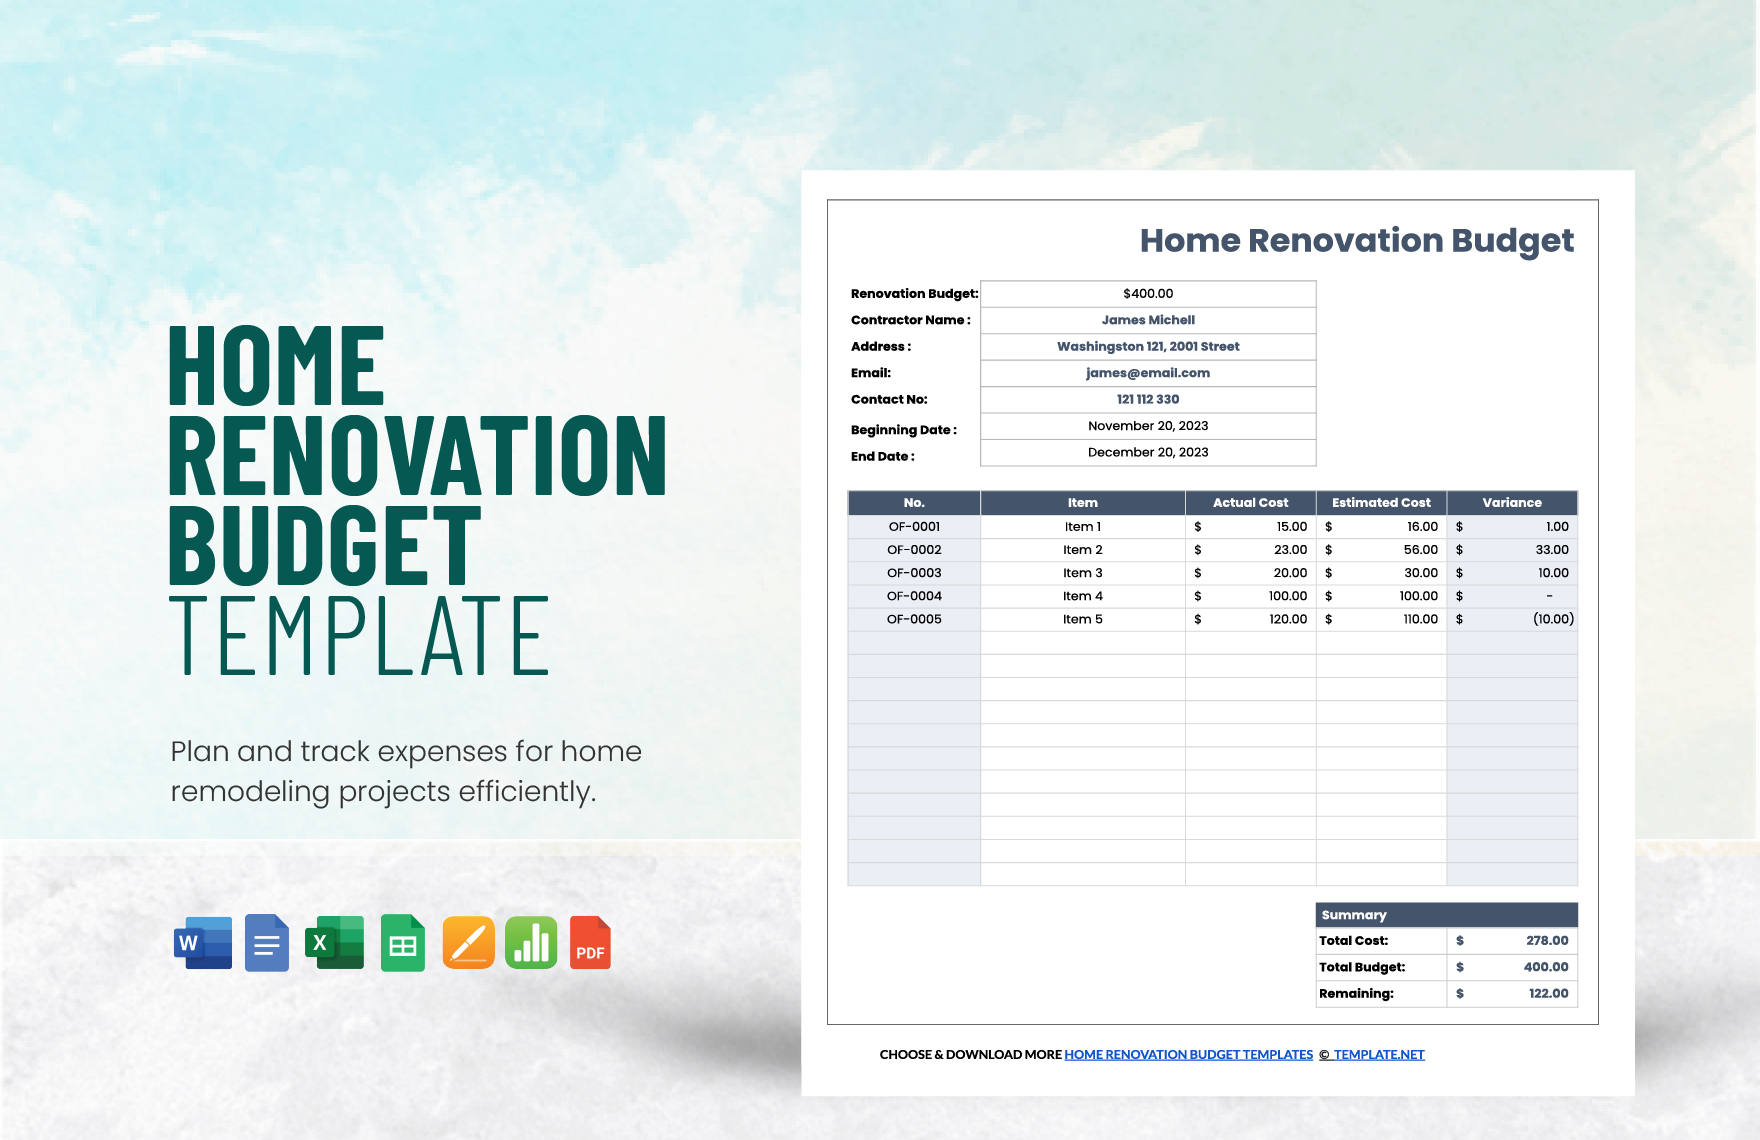 Home Renovation Budget Template in Word, Google Docs, Excel, PDF, Google Sheets, Apple Pages, Apple Numbers